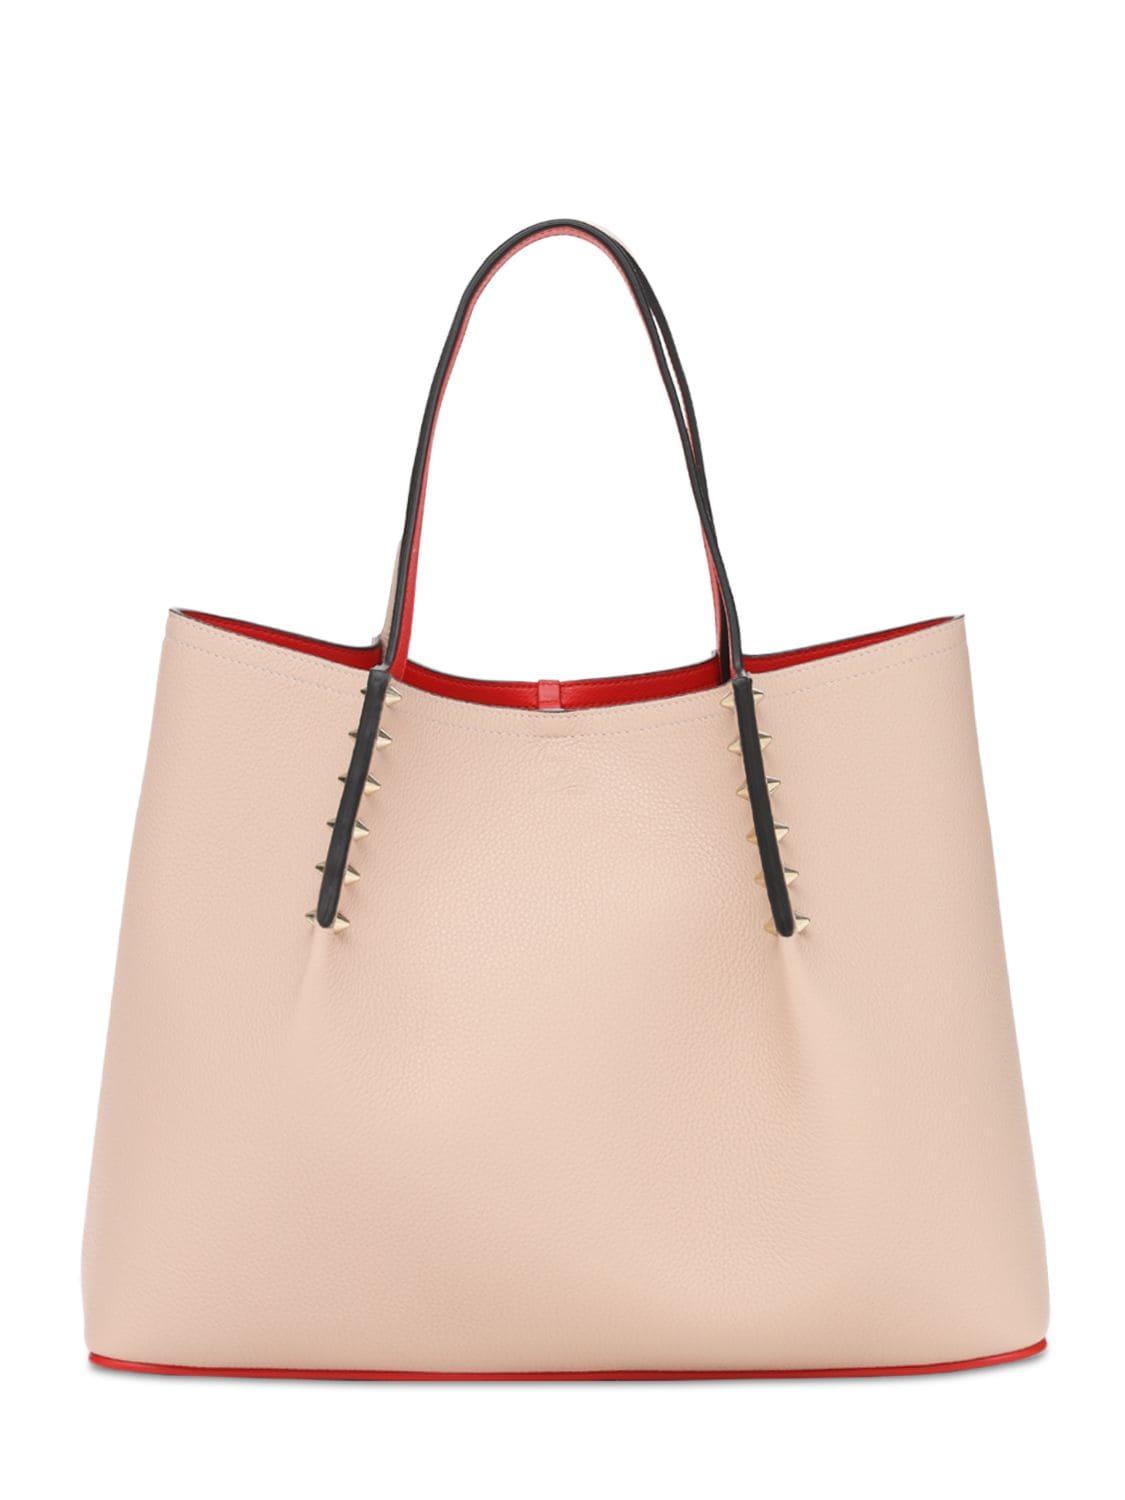 CHRISTIAN LOUBOUTIN CABAROCK SMALL GRAINED LEATHER TOTE,73I0GO005-UDUWMQ2